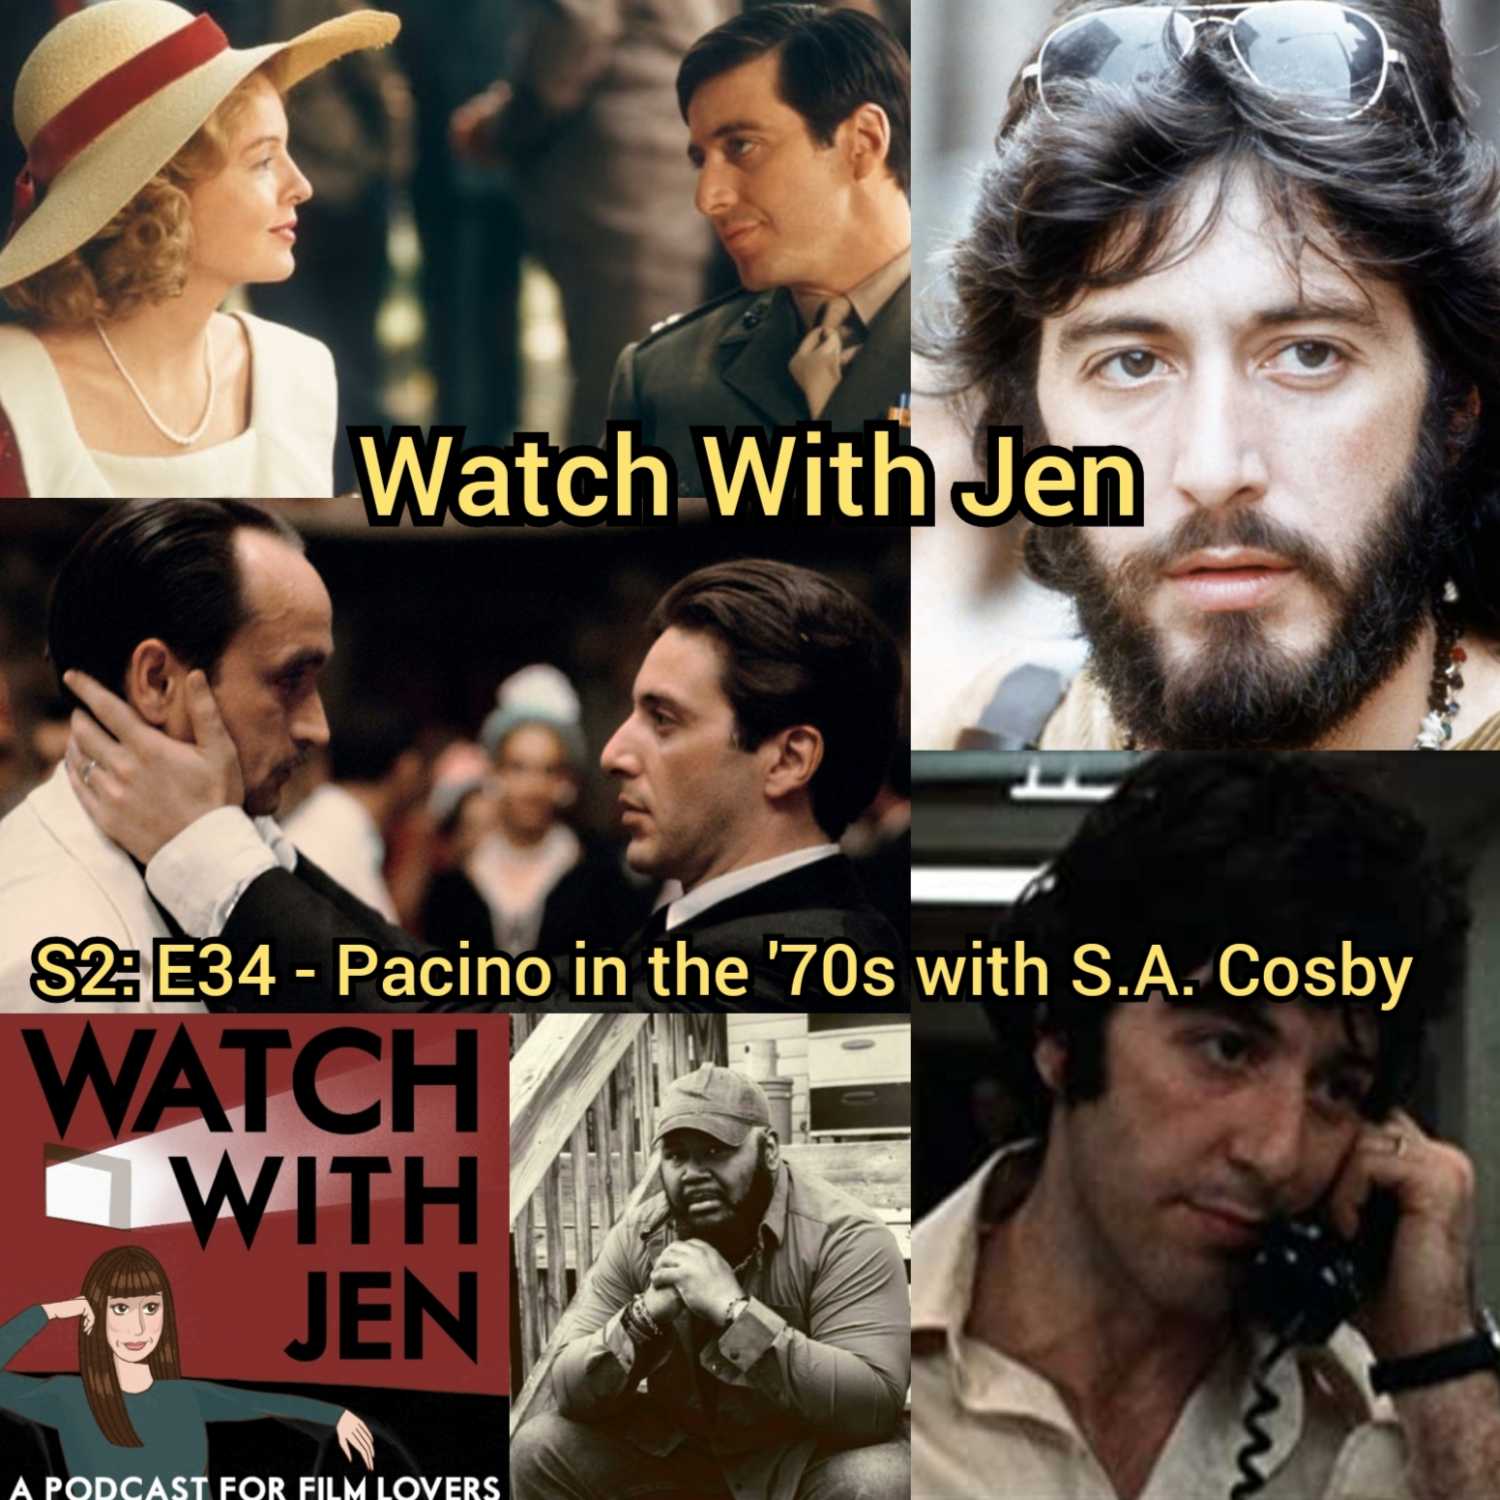 Watch With Jen - S2: E34 - Pacino in the ’70s with S.A. Cosby